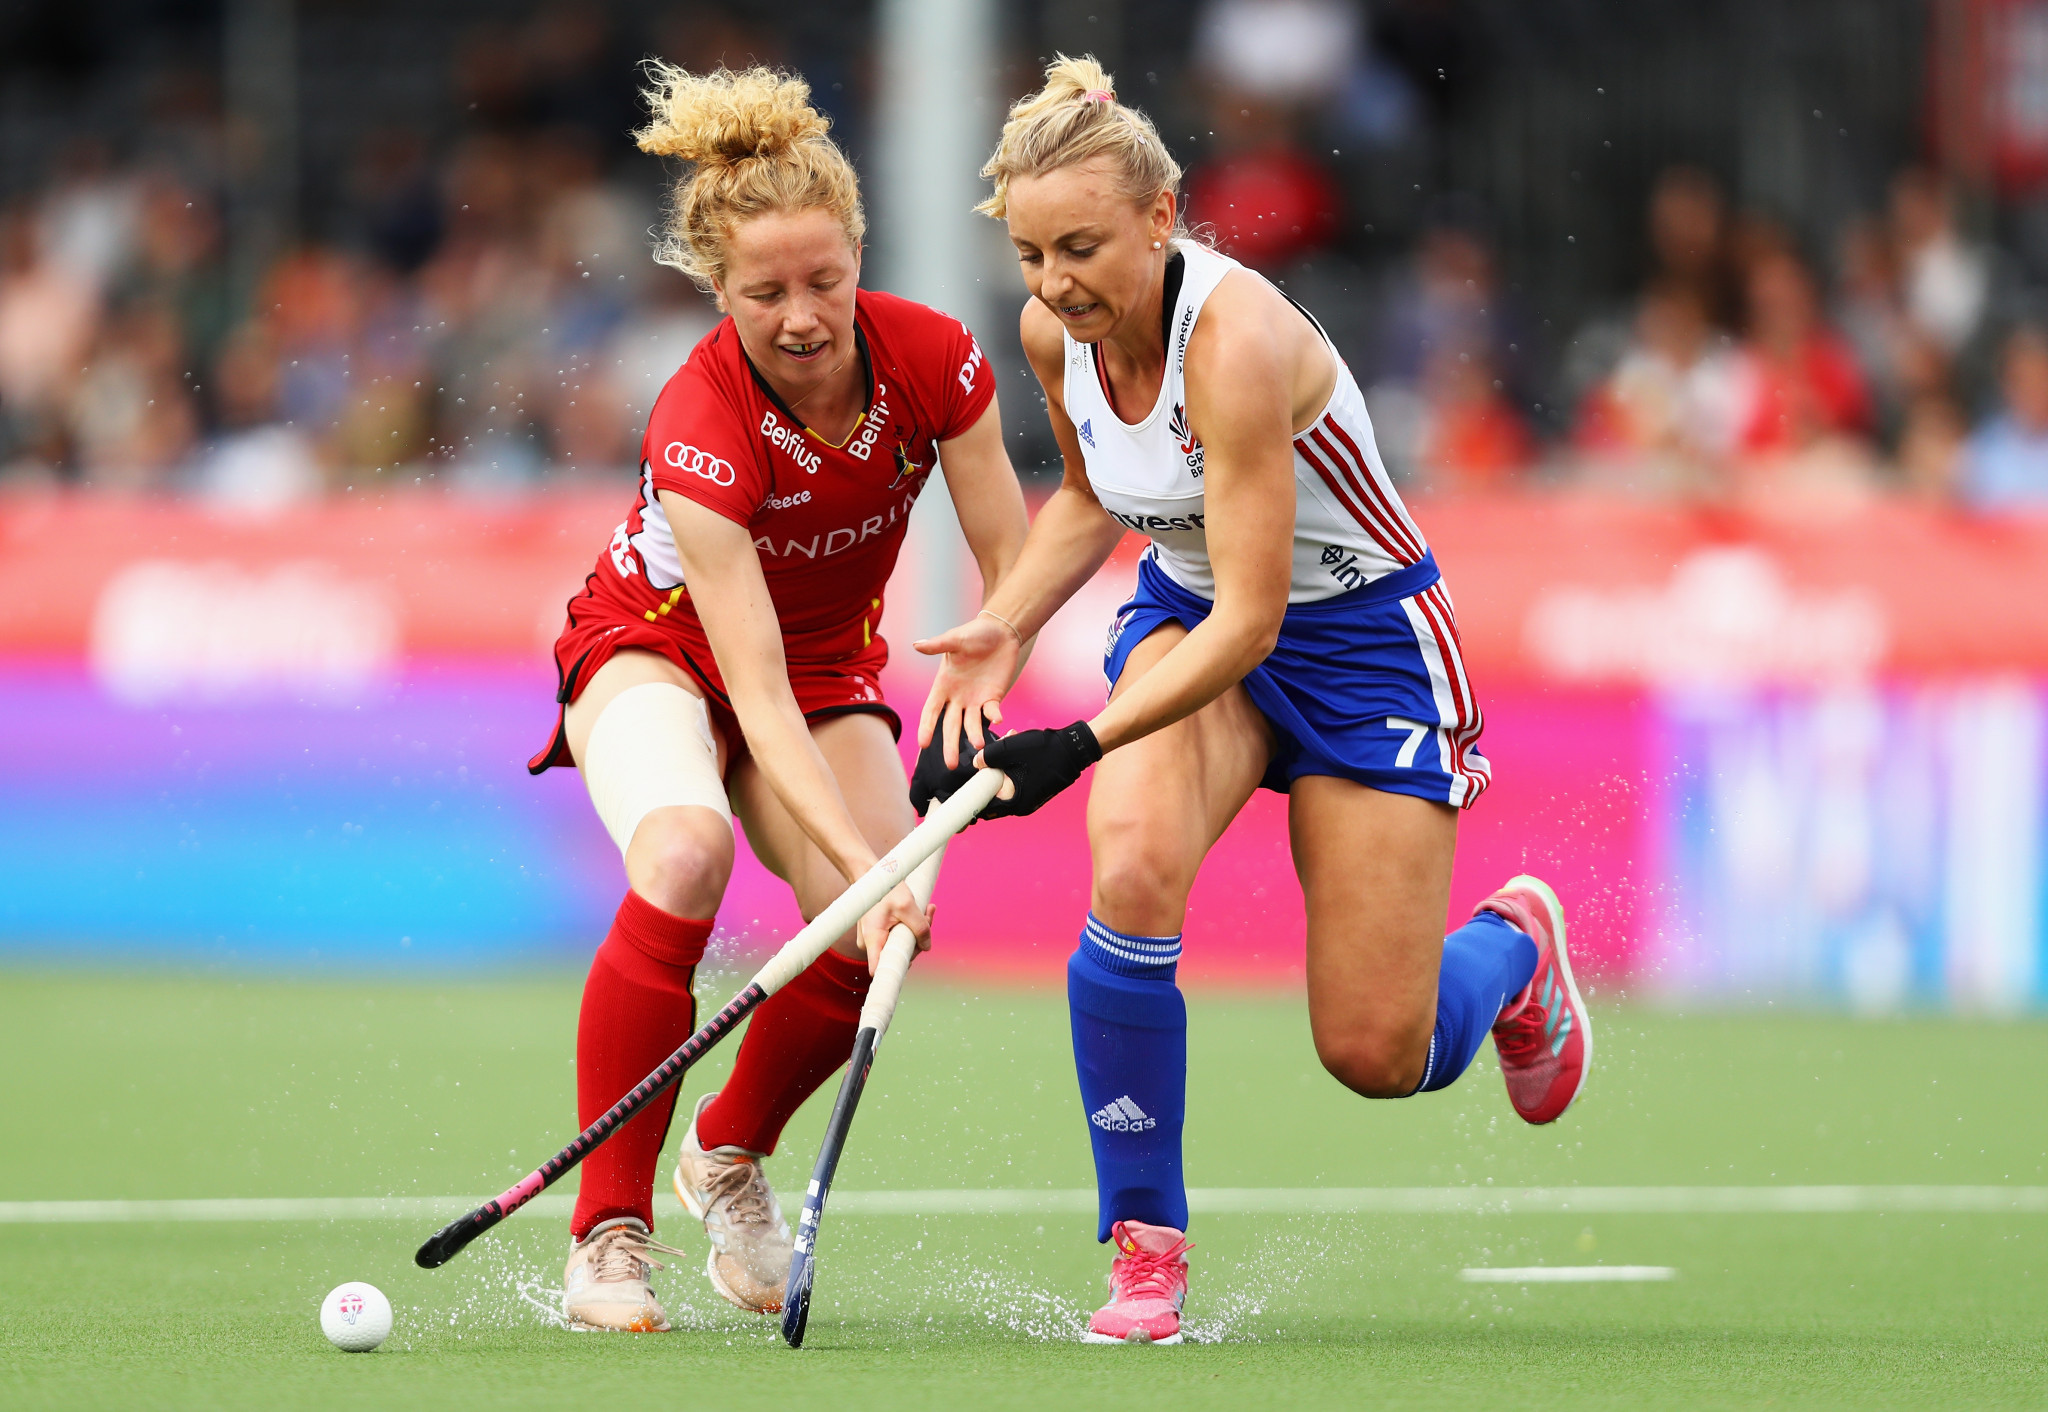 Belgium recorded an emphatic 4-1 victory against Olympic champions Britain in the women's FIH Pro League ©Getty Images